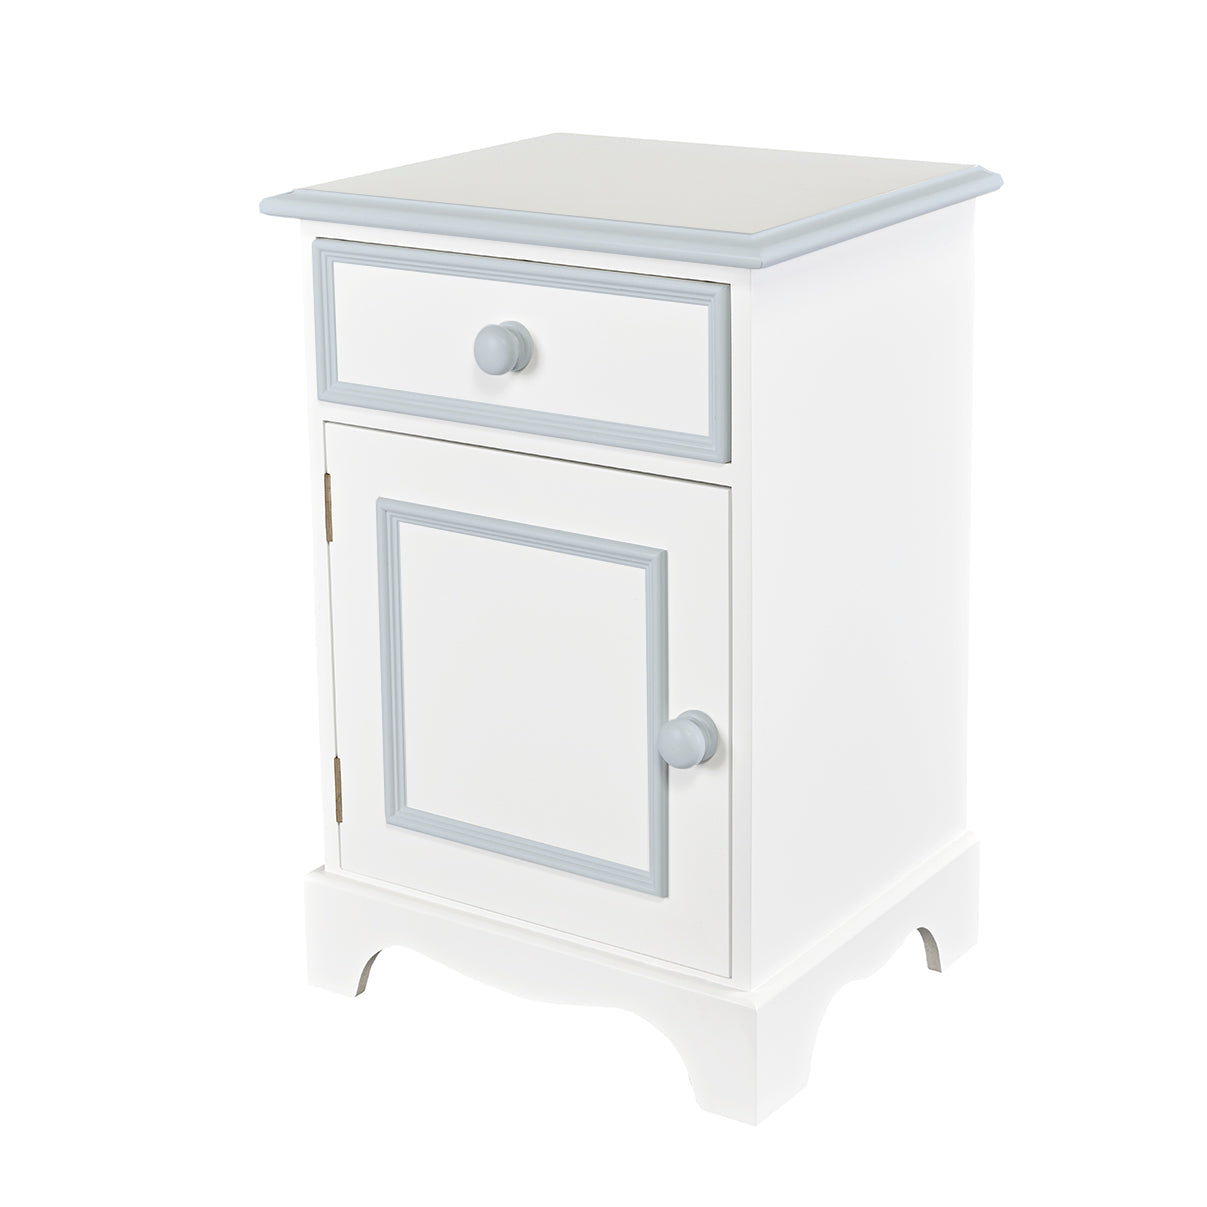 White and gray nightstand with drawer for kids room & nursery | Dragons of Walton Street